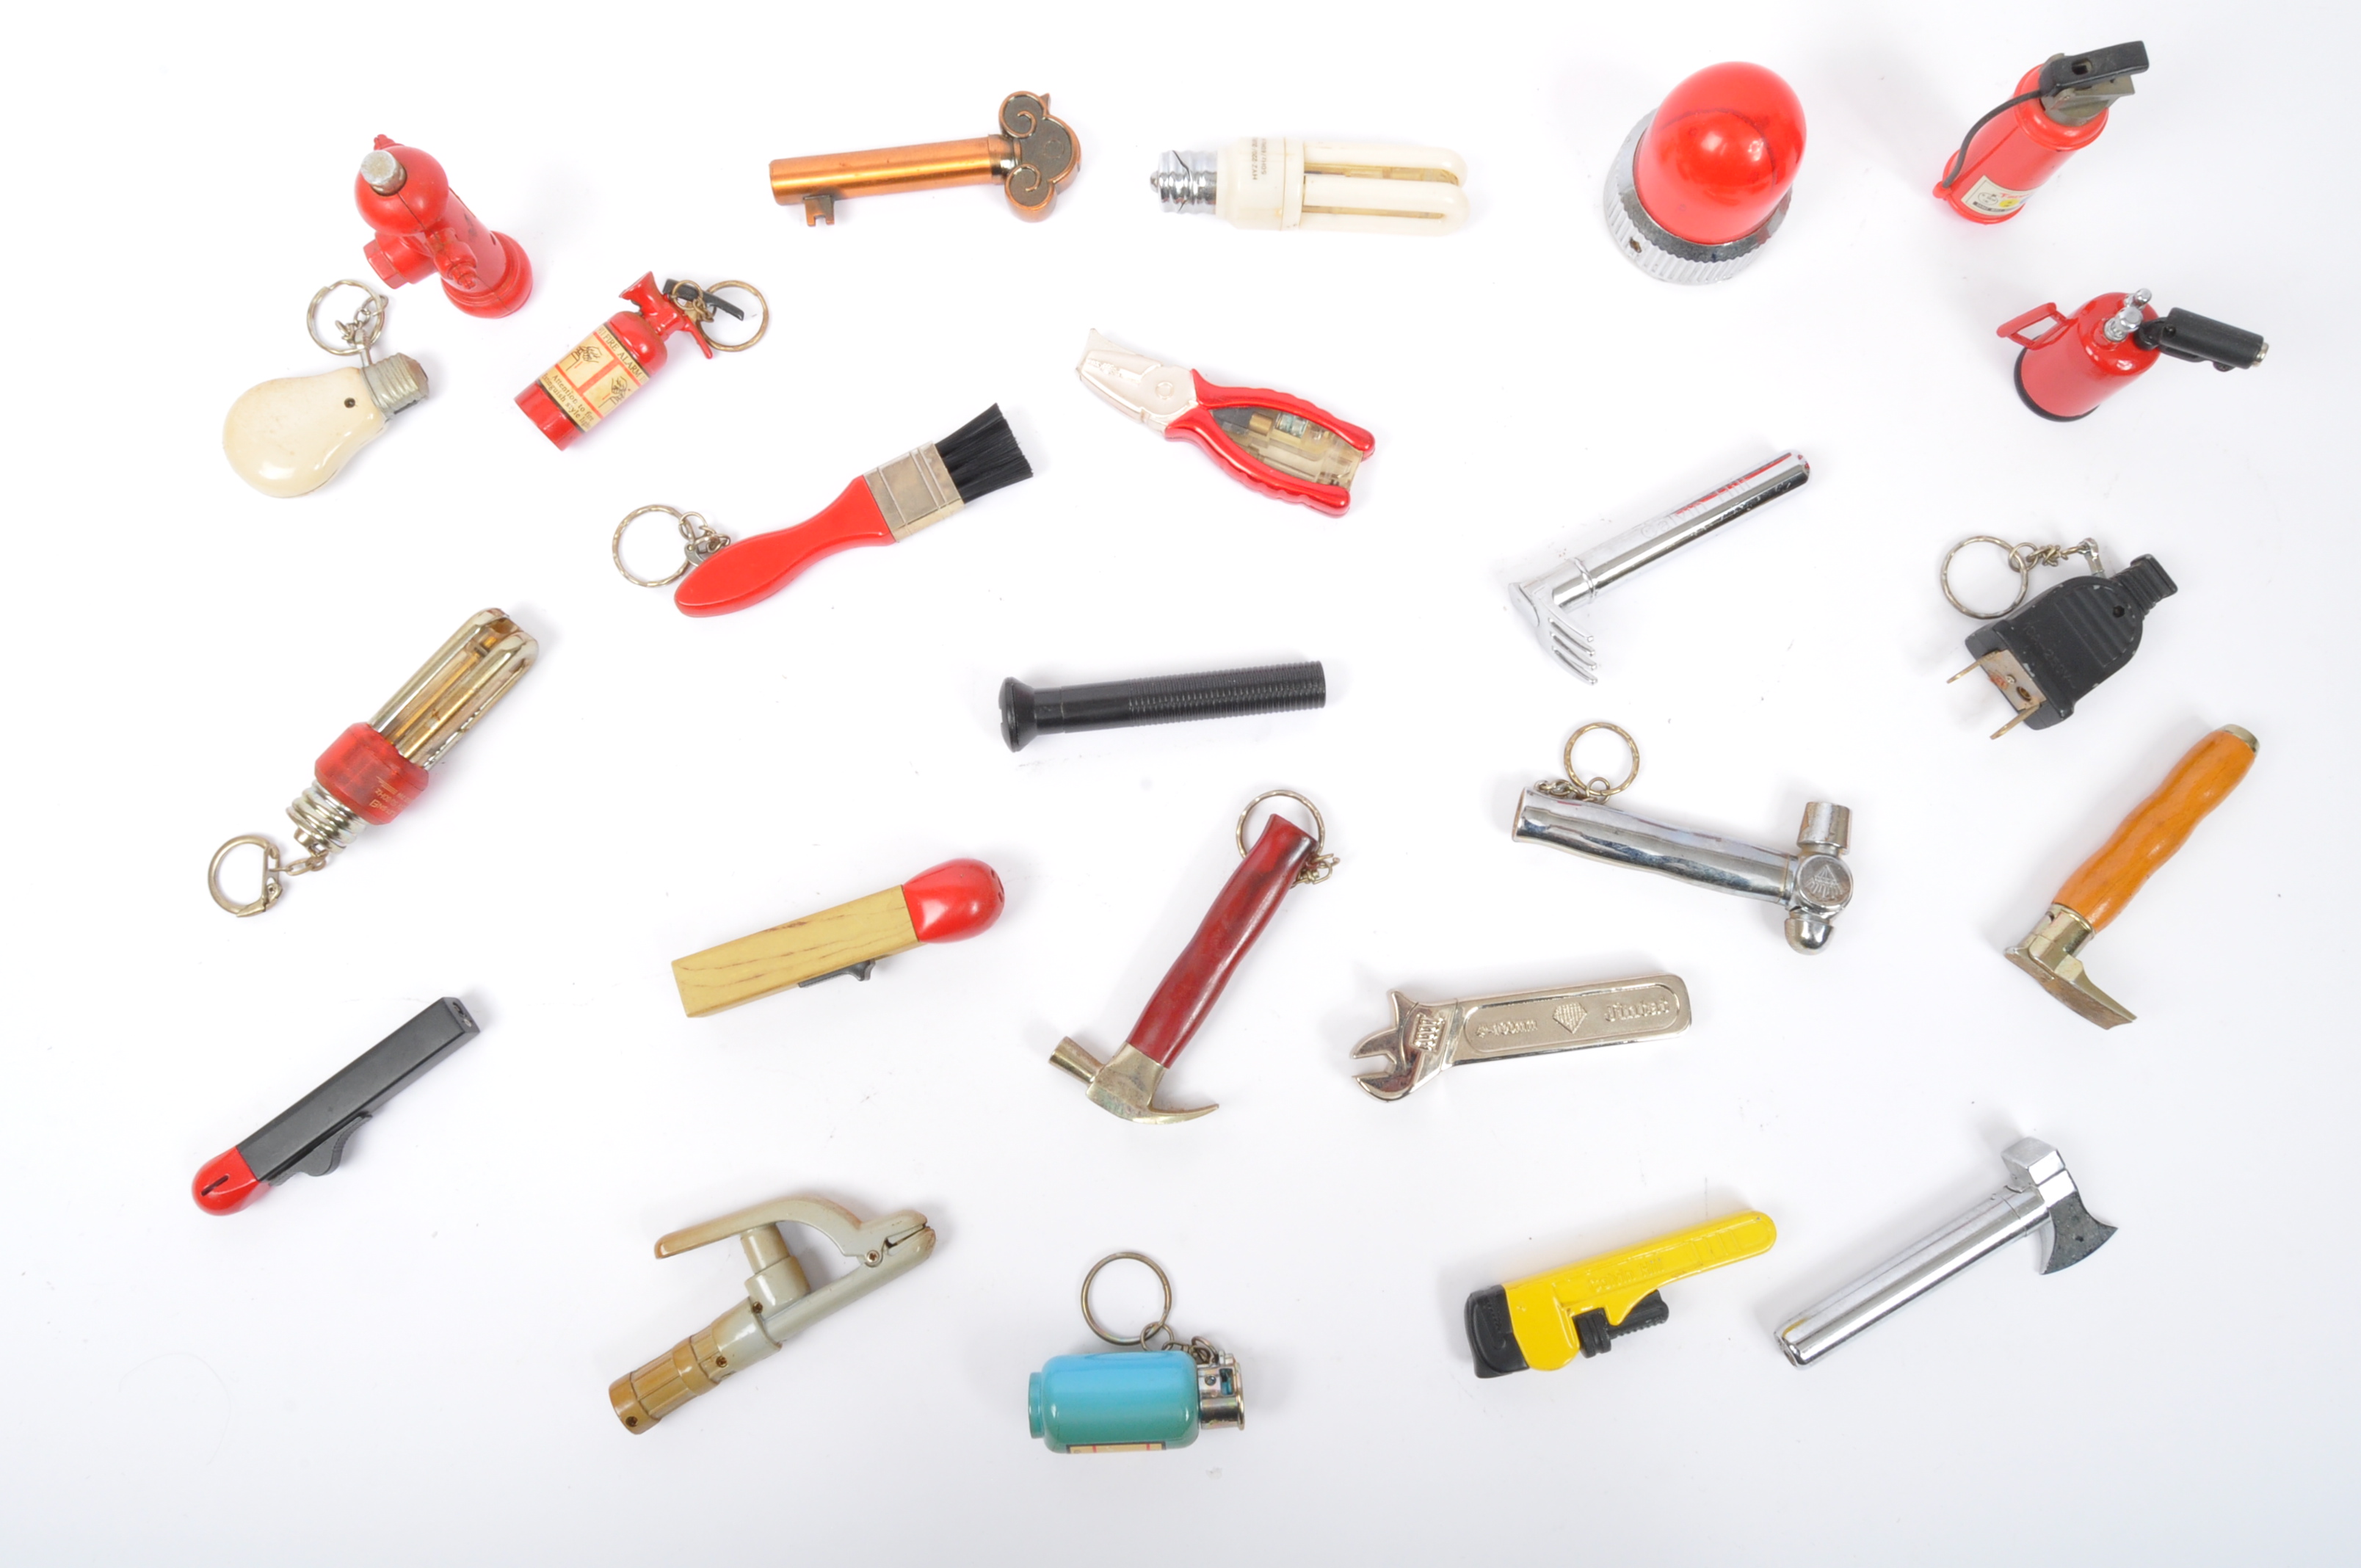 ASSORTMENT OF VINTAGE NOVELTY TOOLS THEMED LIGHTERS - Image 2 of 5